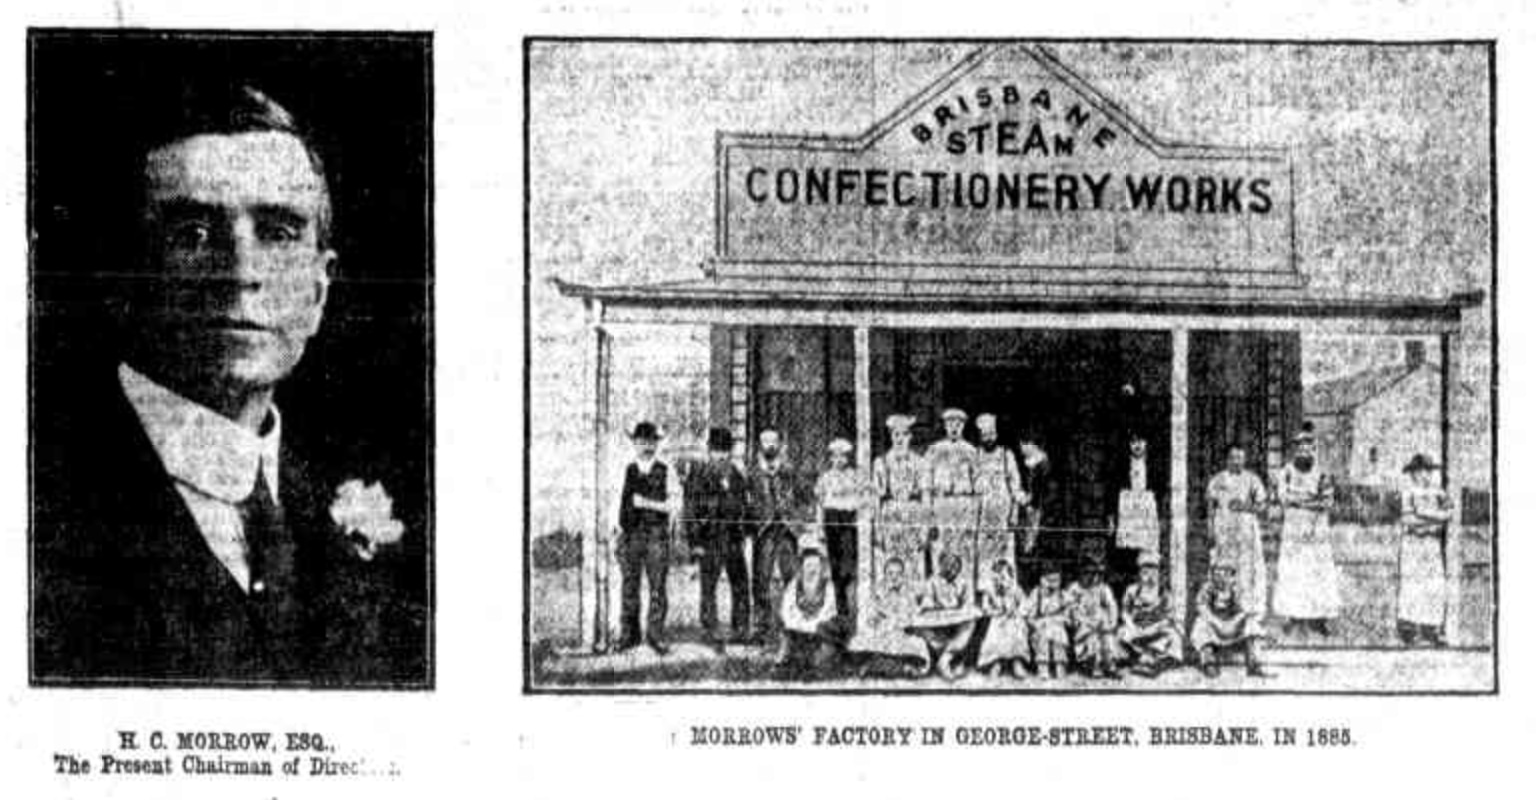 Henry Morrow and Morrow's Factory in George Street, Brisbane, 1885